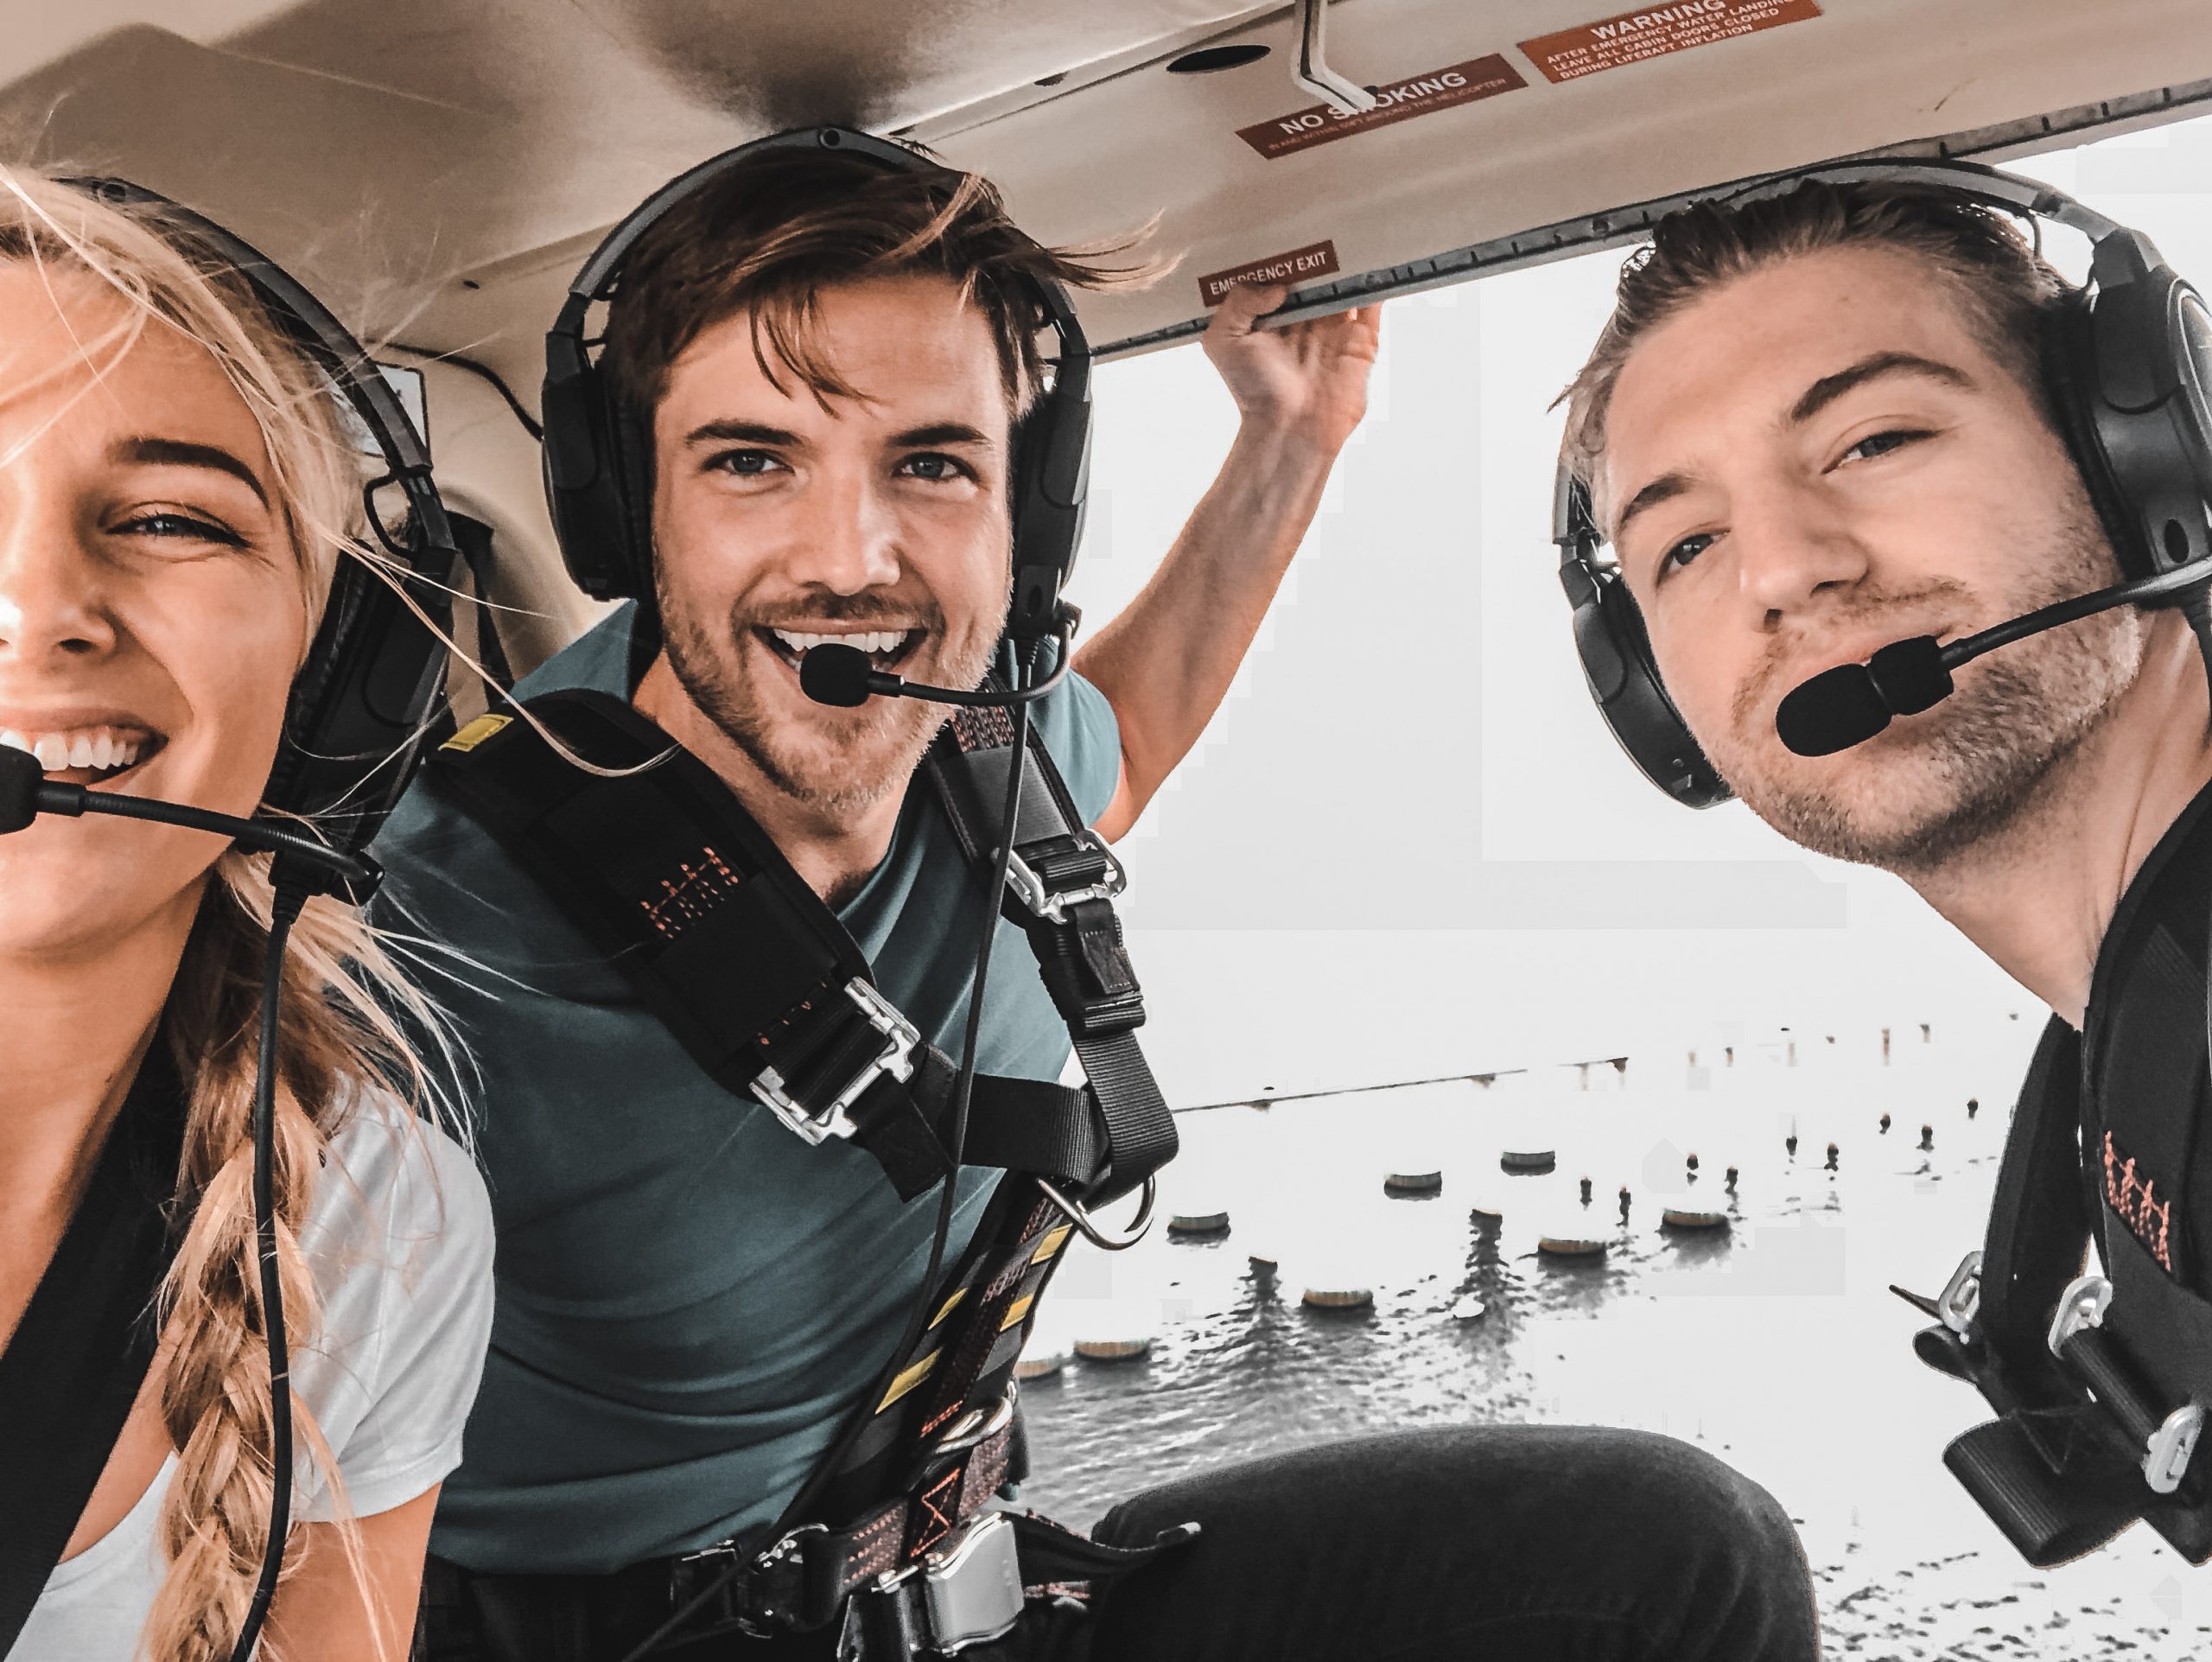 Group selfie of three people in helicopter